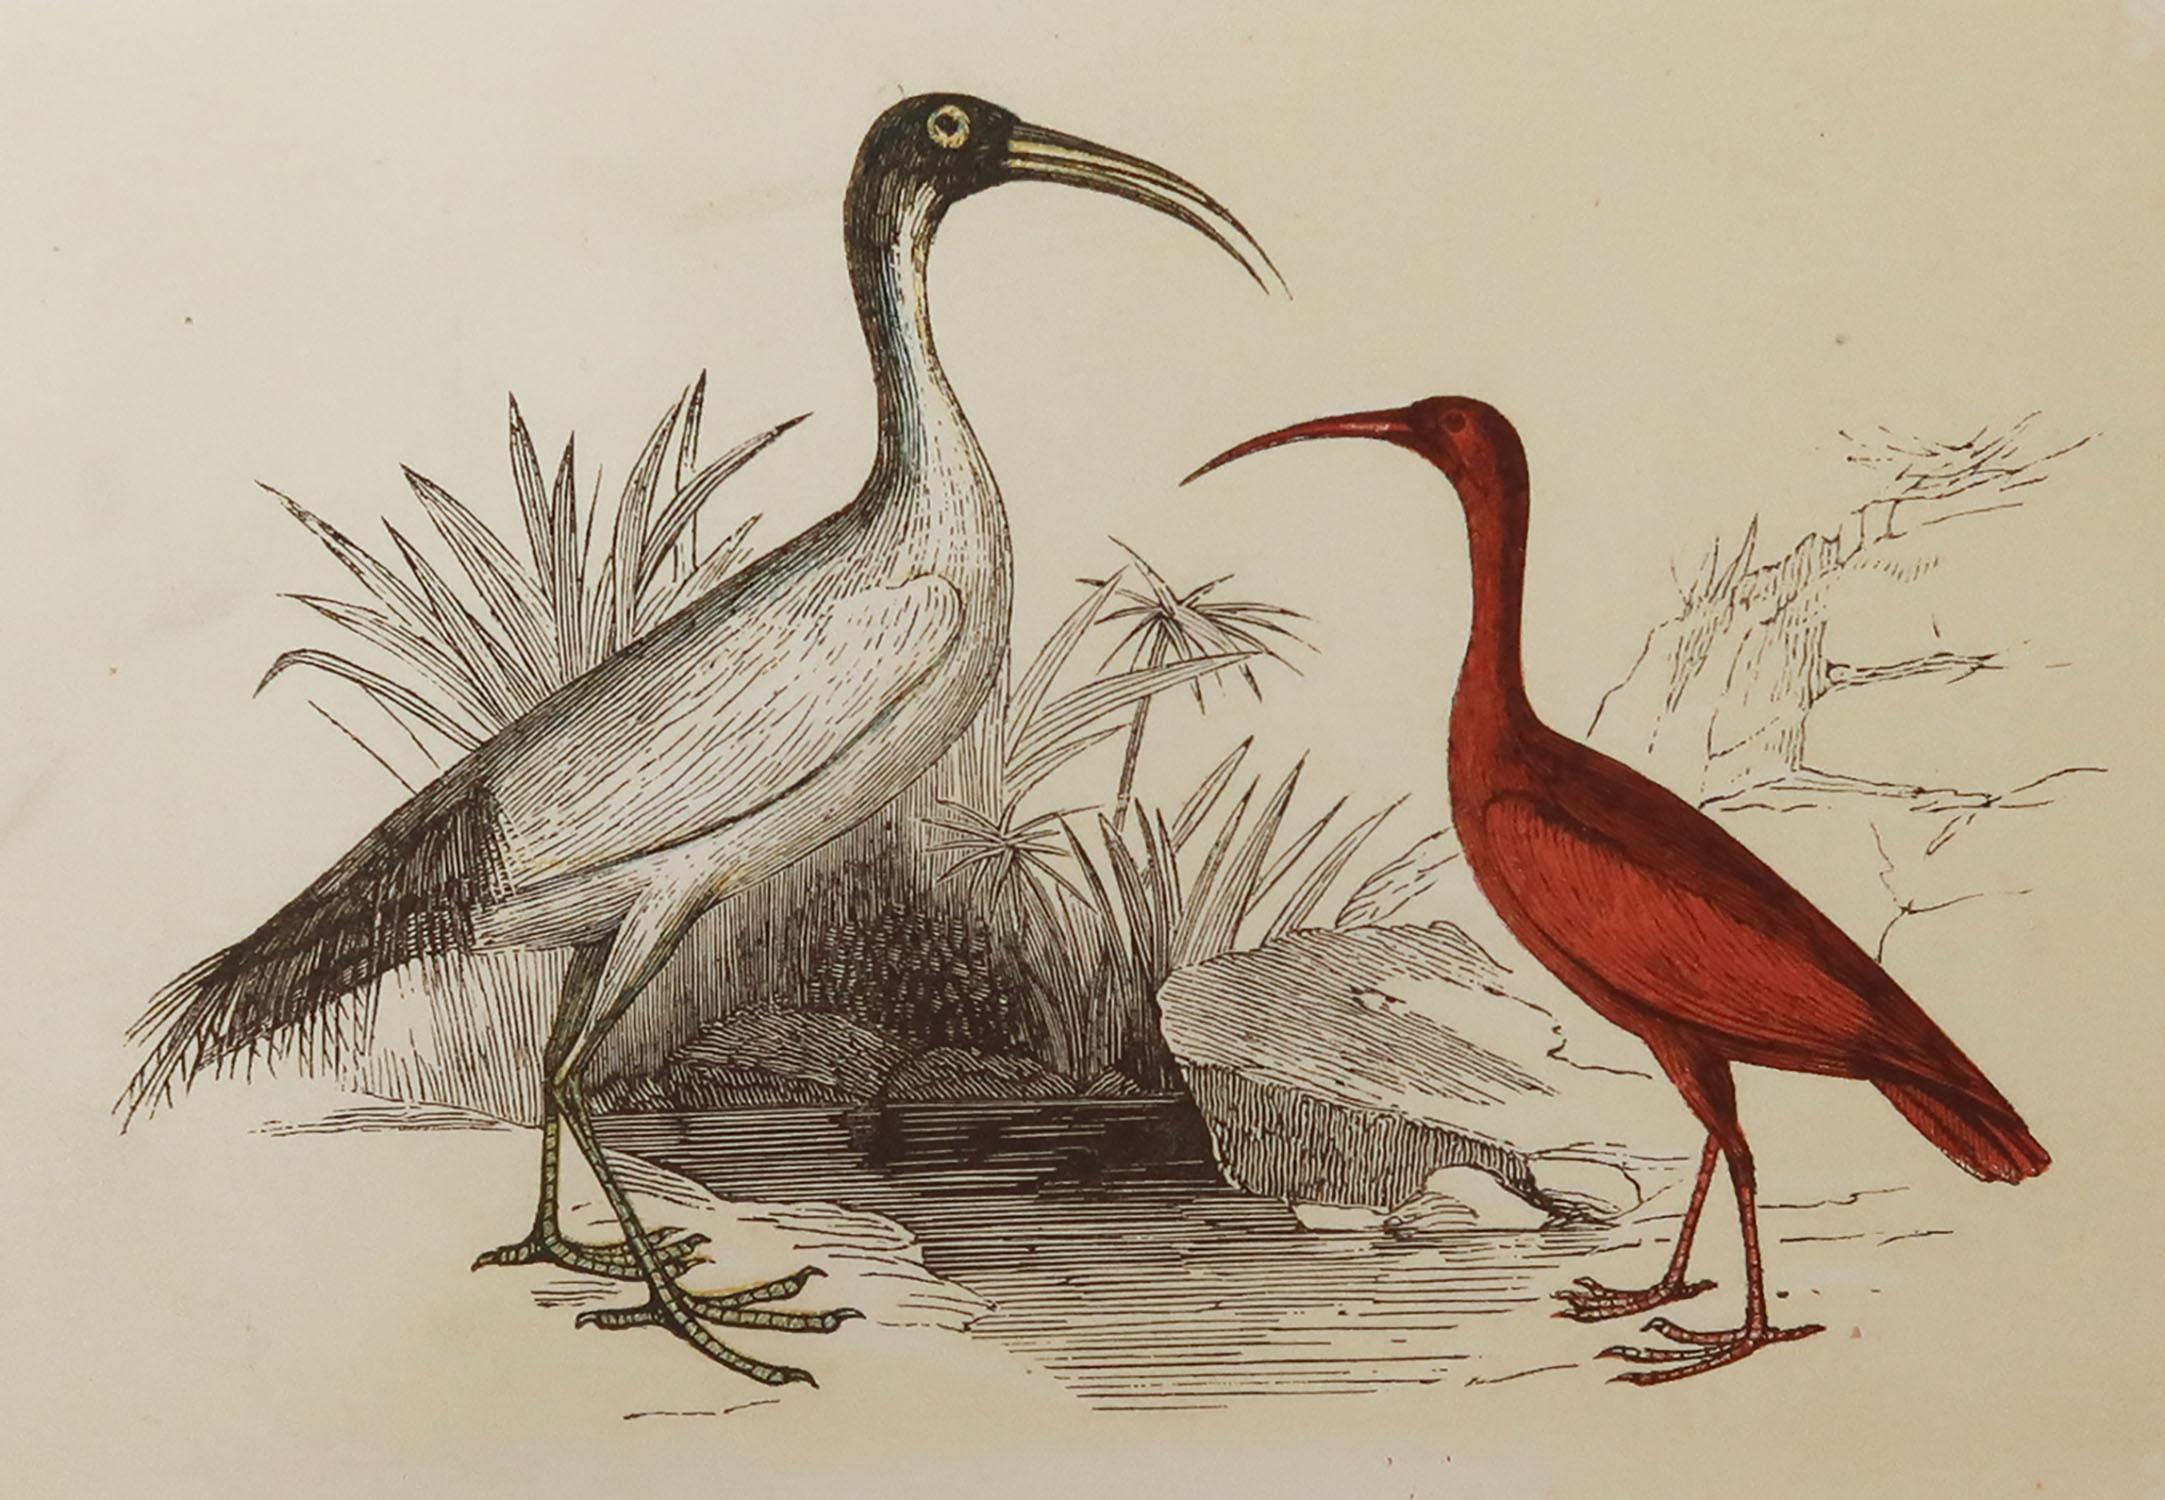 Great image of Ibis

Unframed. It gives you the option of perhaps making a set up using your own choice of frames.

Lithograph with original color.

Published by Tallis circa 1850

Crudely inscribed title has been erased at the bottom of the